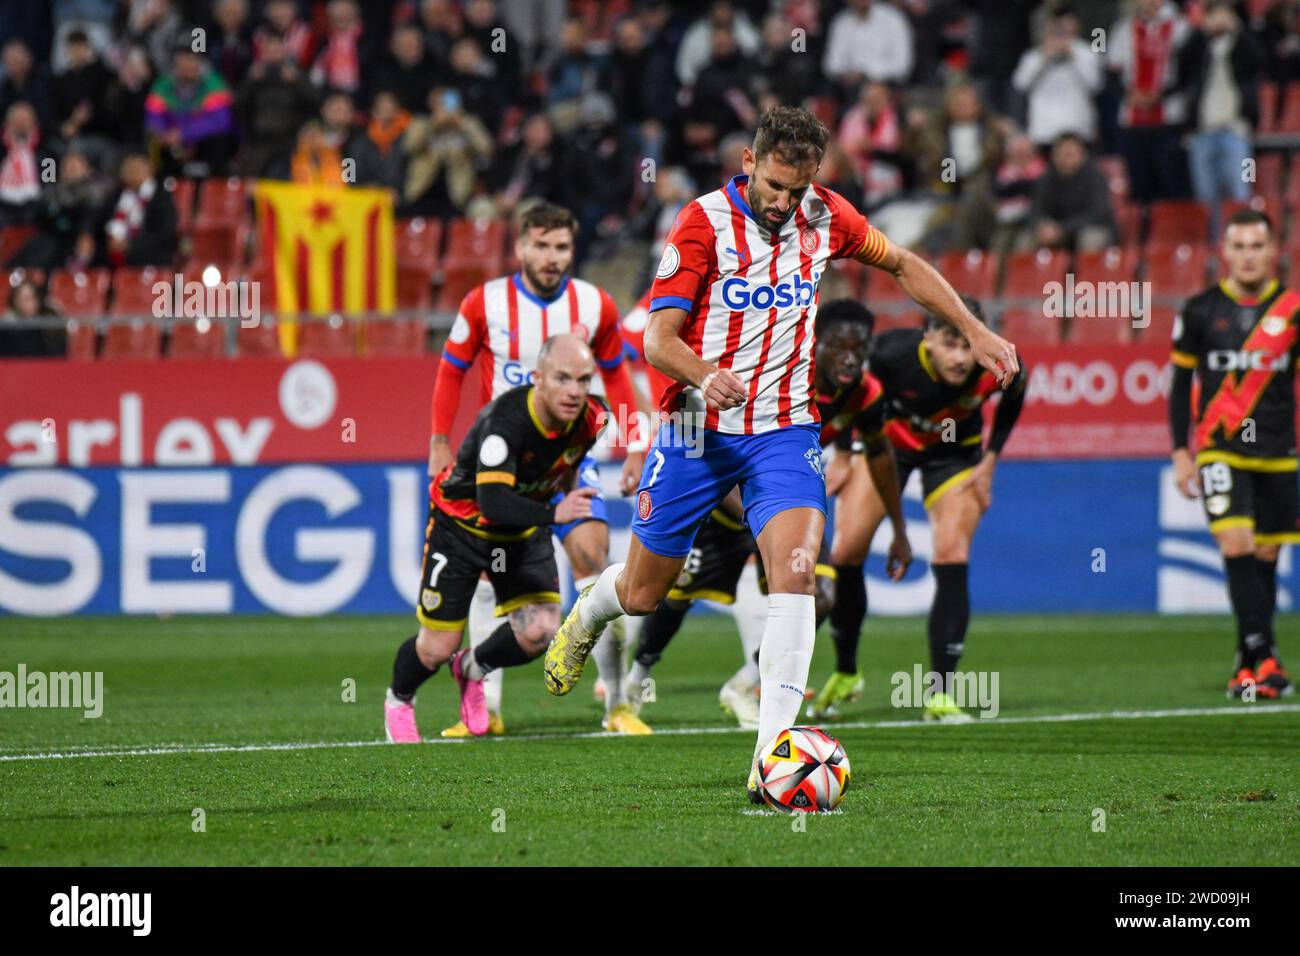 Girona, Spain. 17th Jan, 2024. GIRONA, SPAIN - JANUARY 17: Player of Girona FC Cristhian Stuani shoots the ball during the match between Girona FC and Raya Vallecano as part of round 16 of Copa del Rey at Estadio Montilivi on January 17, 2024 in Girona, Spain. (Photo by Sara Aribó/PxImages) Credit: Px Images/Alamy Live News Stock Photo